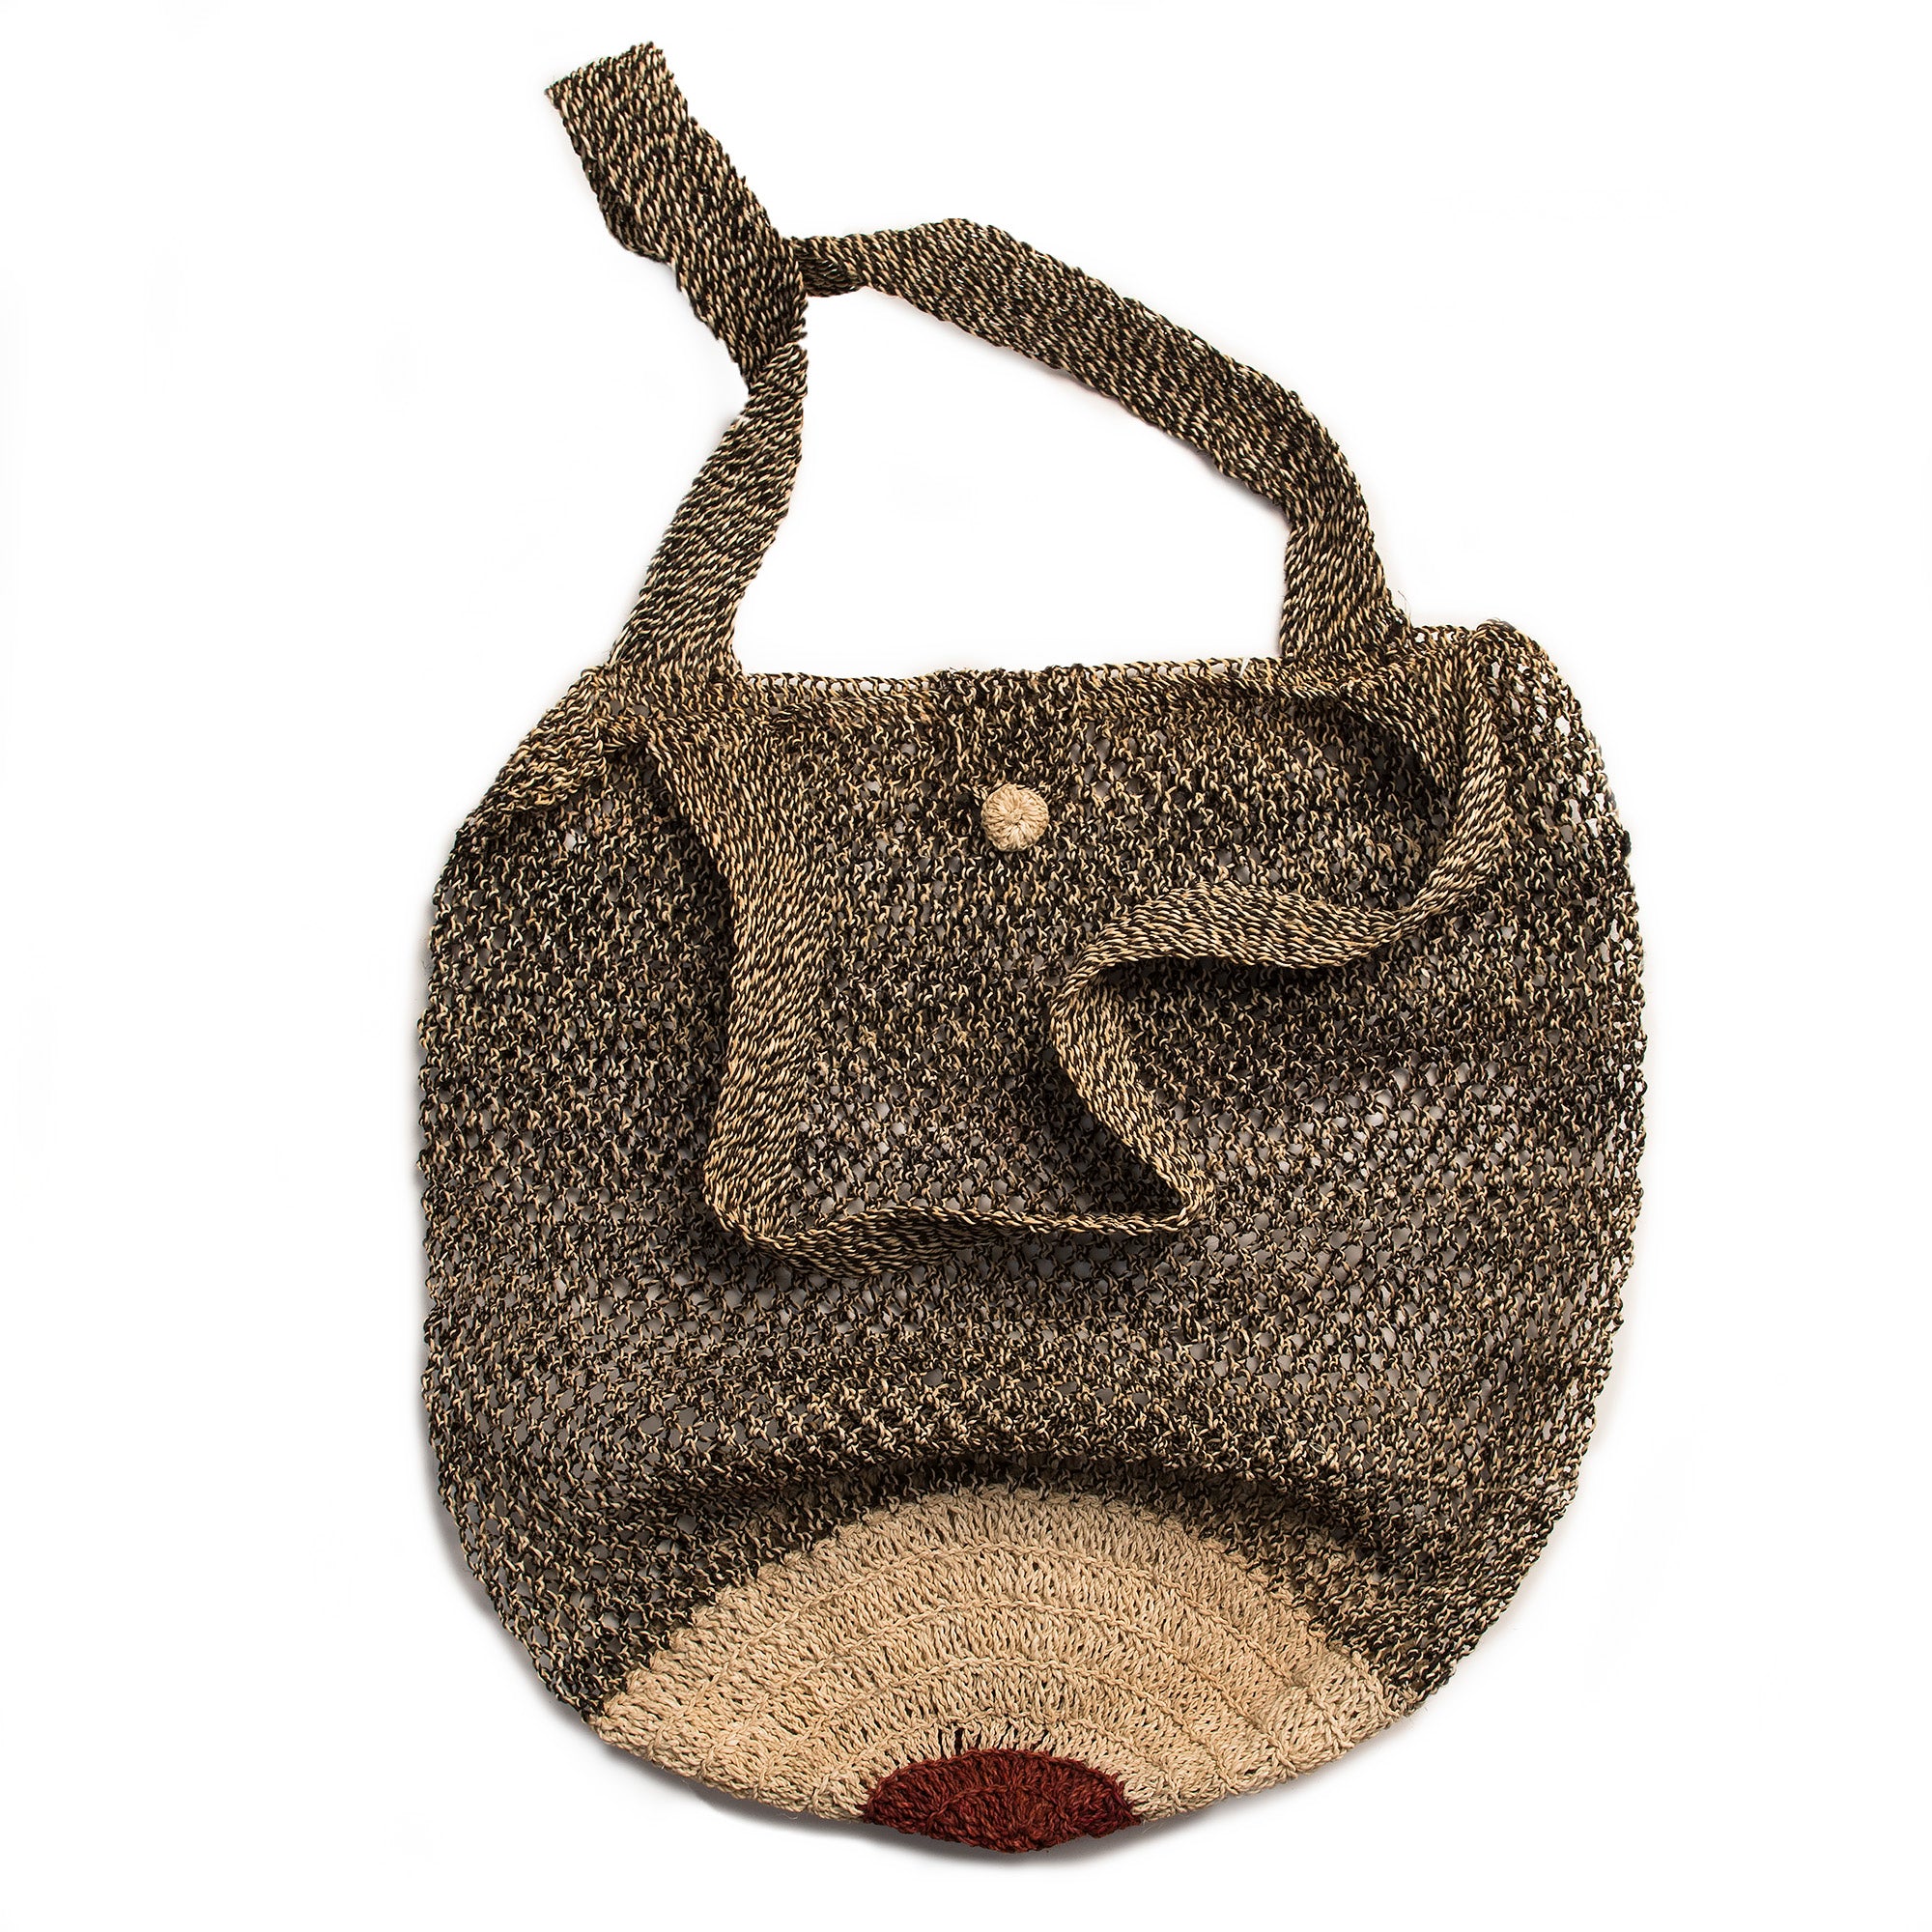 Open Weave, Crocheted, Striped Double Strap Brown and Ivory Bags, made in the Peruvian Amazon